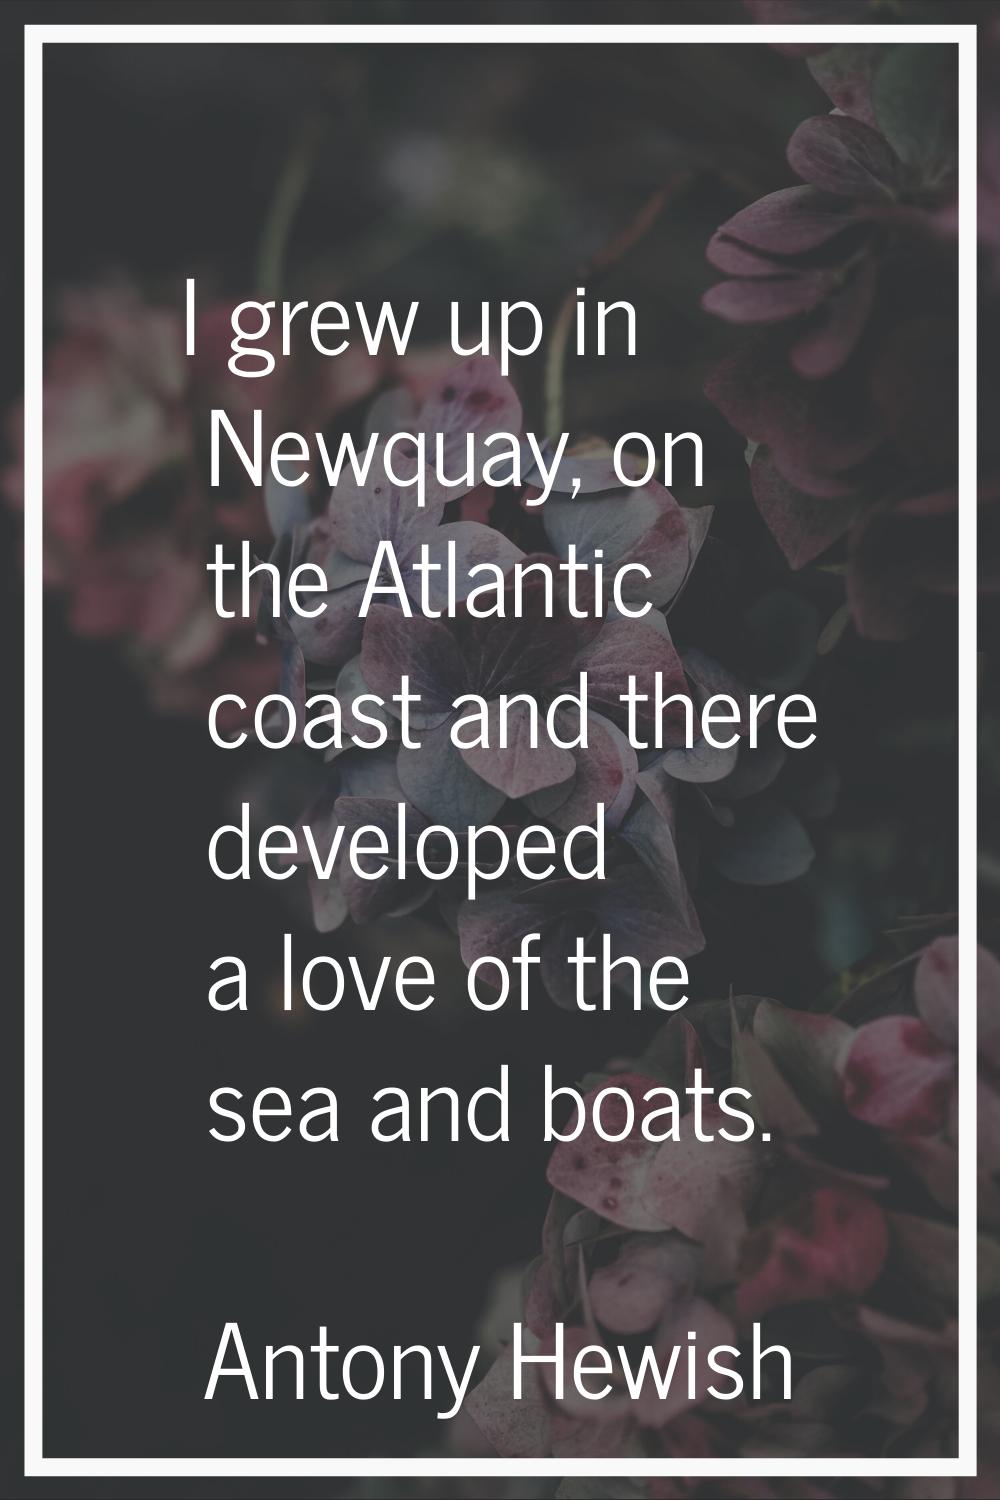 I grew up in Newquay, on the Atlantic coast and there developed a love of the sea and boats.